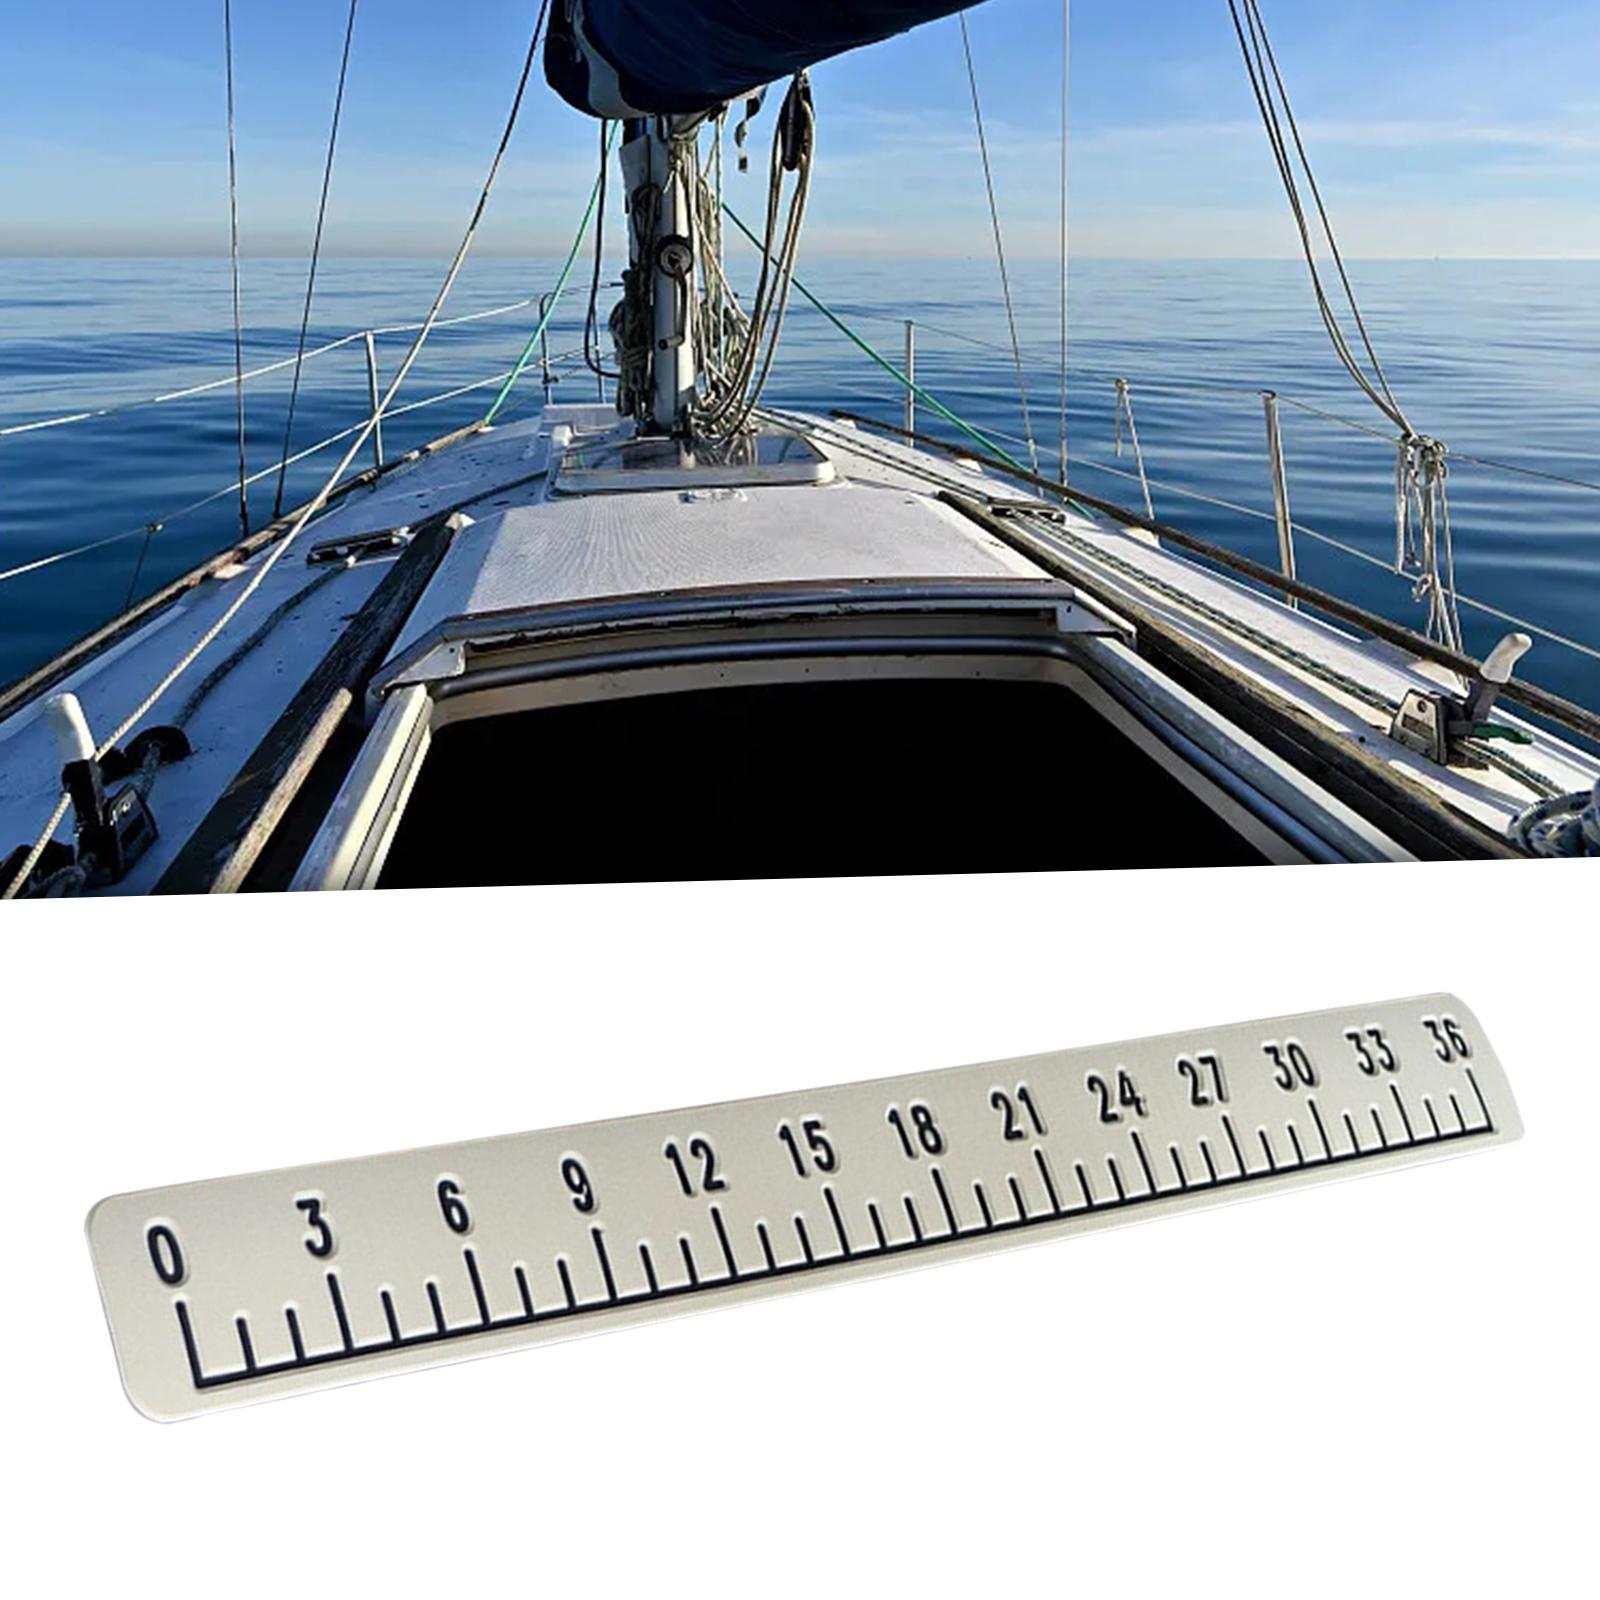 39" Fish Ruler for Boat Accurate 6mm Thickness High Density for Sailboats beige black